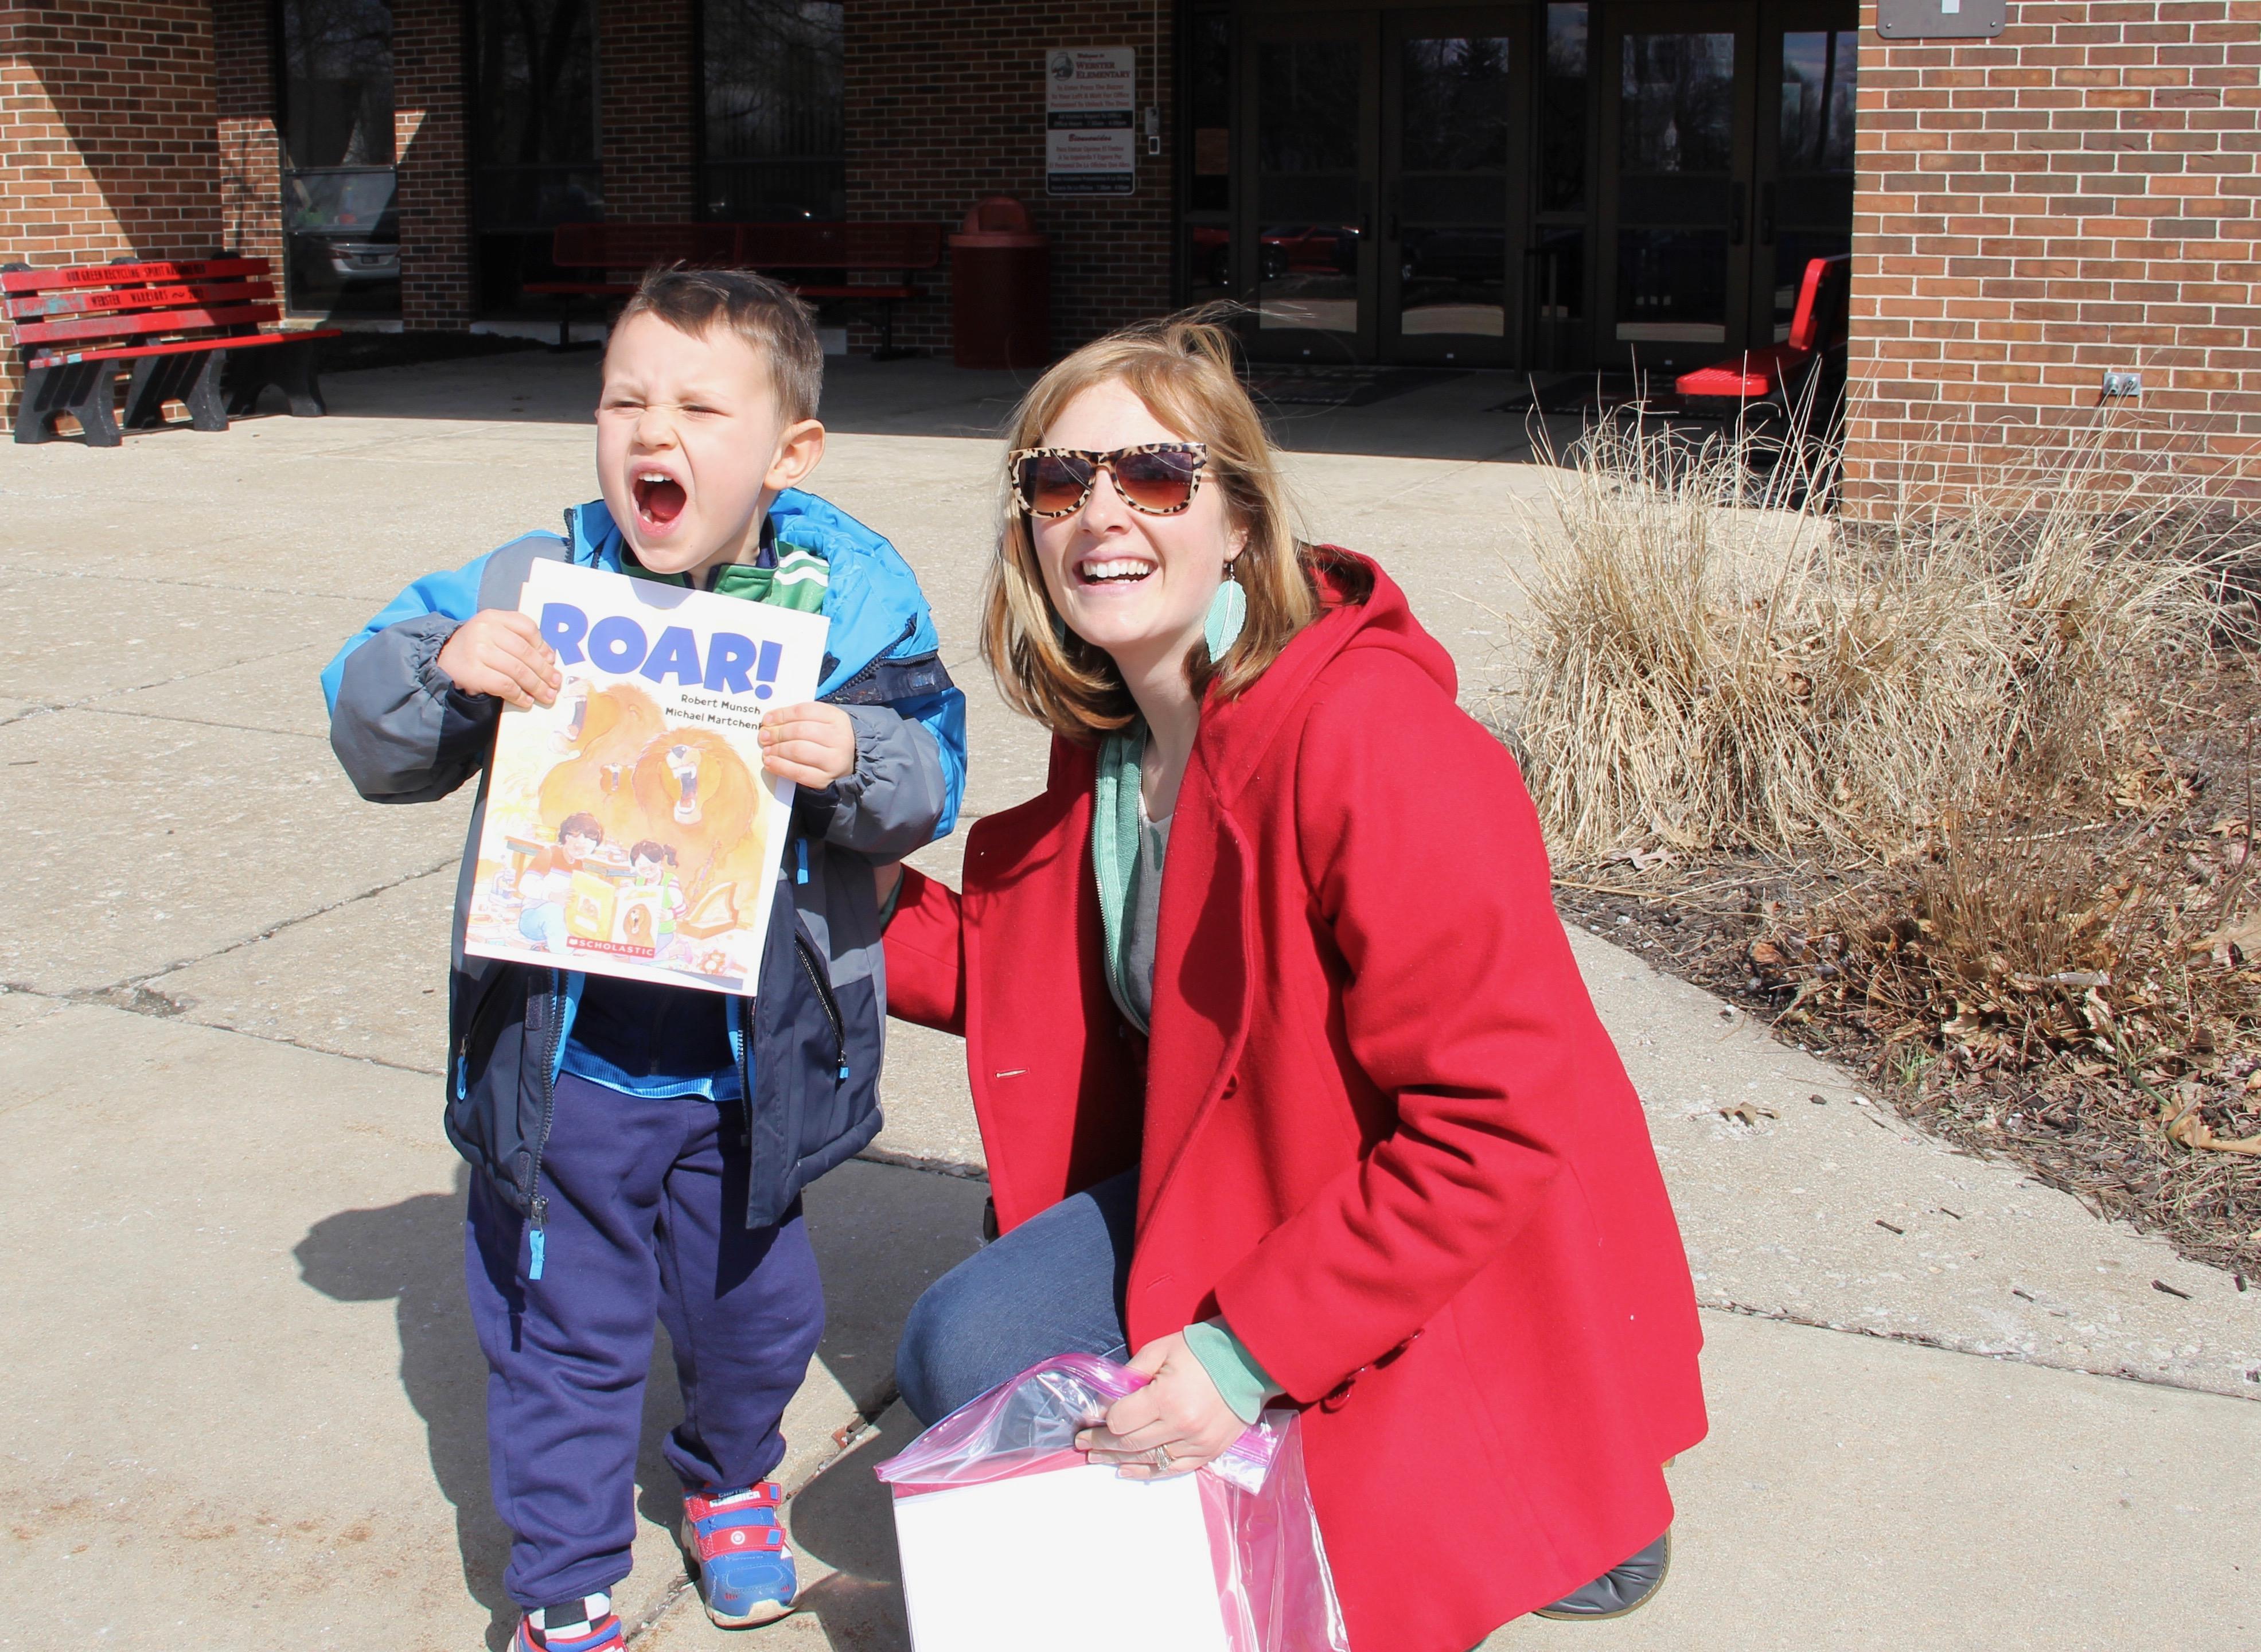 Eamonn Day loves lions and reading about them. He demonstrates the sound a lion makes as he and his mom, Haley, pause for a picture after leaving PCSC's Kindergarten Roundup at Webster on Thursday.